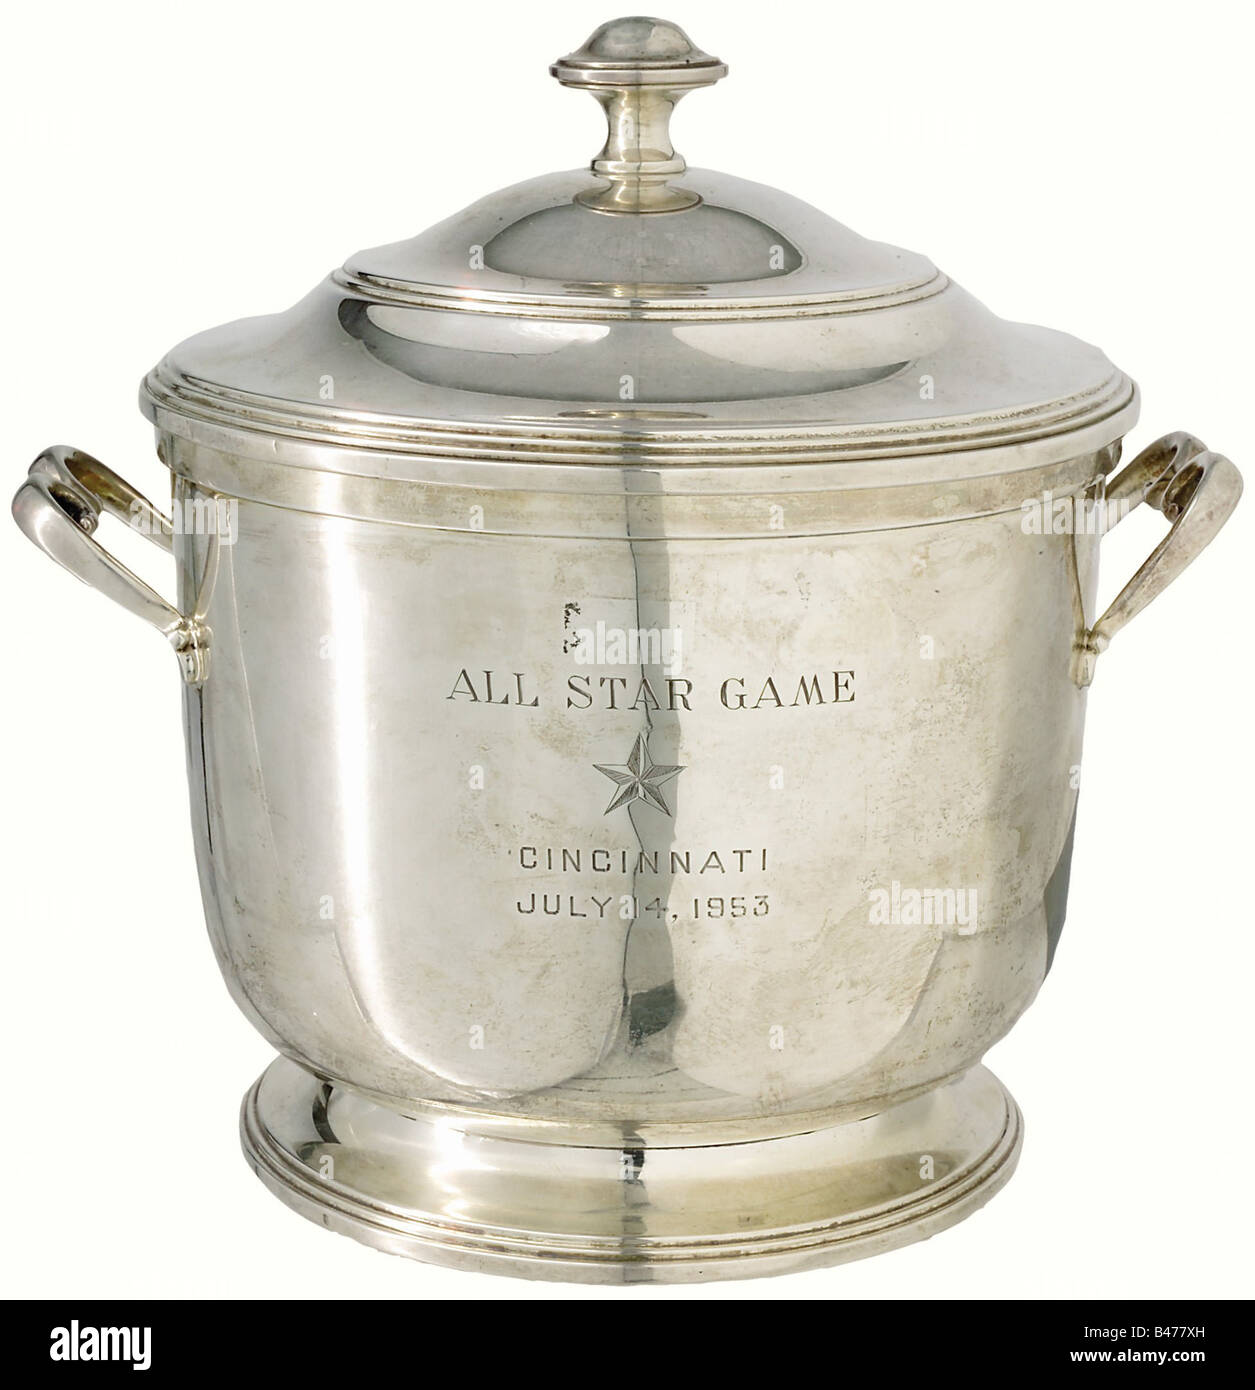 A cup for the All Star baseball games, USA, 1953. Heavy cup with lid made of Sterling silver. Curved handles on both sides, stepped lid with plain handle. Obverse side engraved 'All Star Game' and beneath a star 'Cincinnati July 14. 1953'. At the bottom maker's mark and the name 'Spaulding & Company Sterling 50'. Two small dents to the left and right of the engraving. Height 23 cm, diameter 18 cm, weight 970 g. historic, historical, 1950s, 20th century, USA, United States of America, American, object, objects, stills, clipping, clippings, cut out, cut-out, cut-, Stock Photo